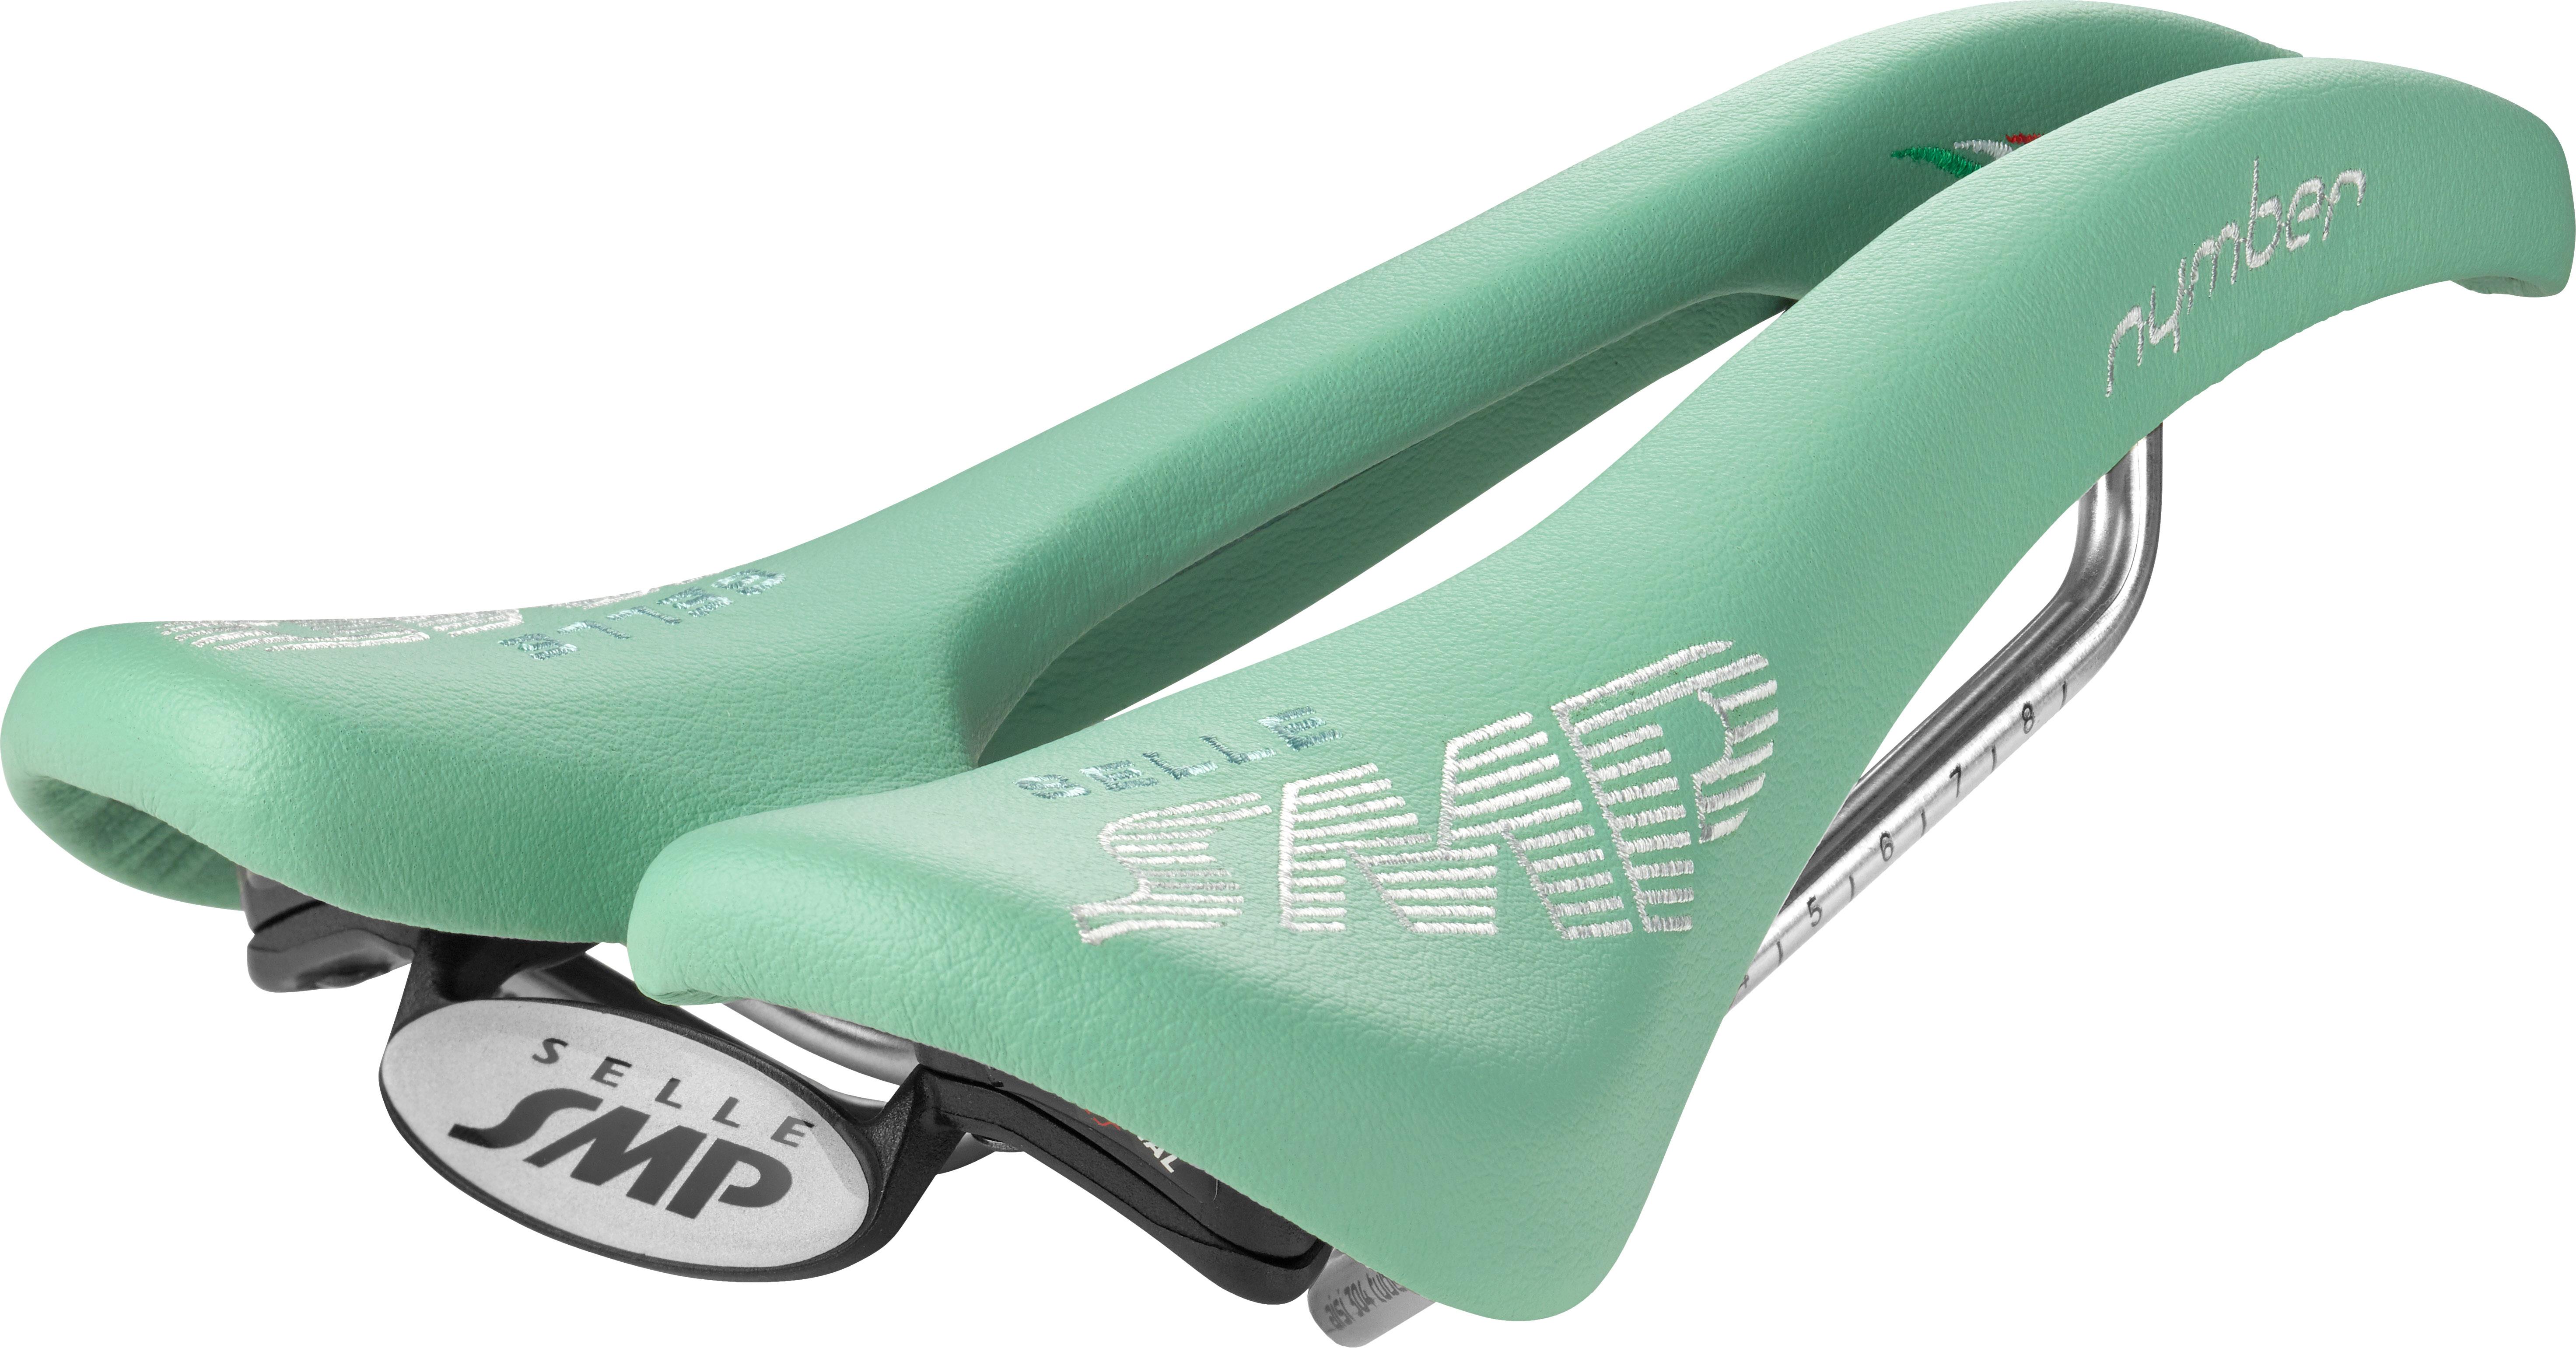 Selle Smp Nymber Saddle - Bianchi Green